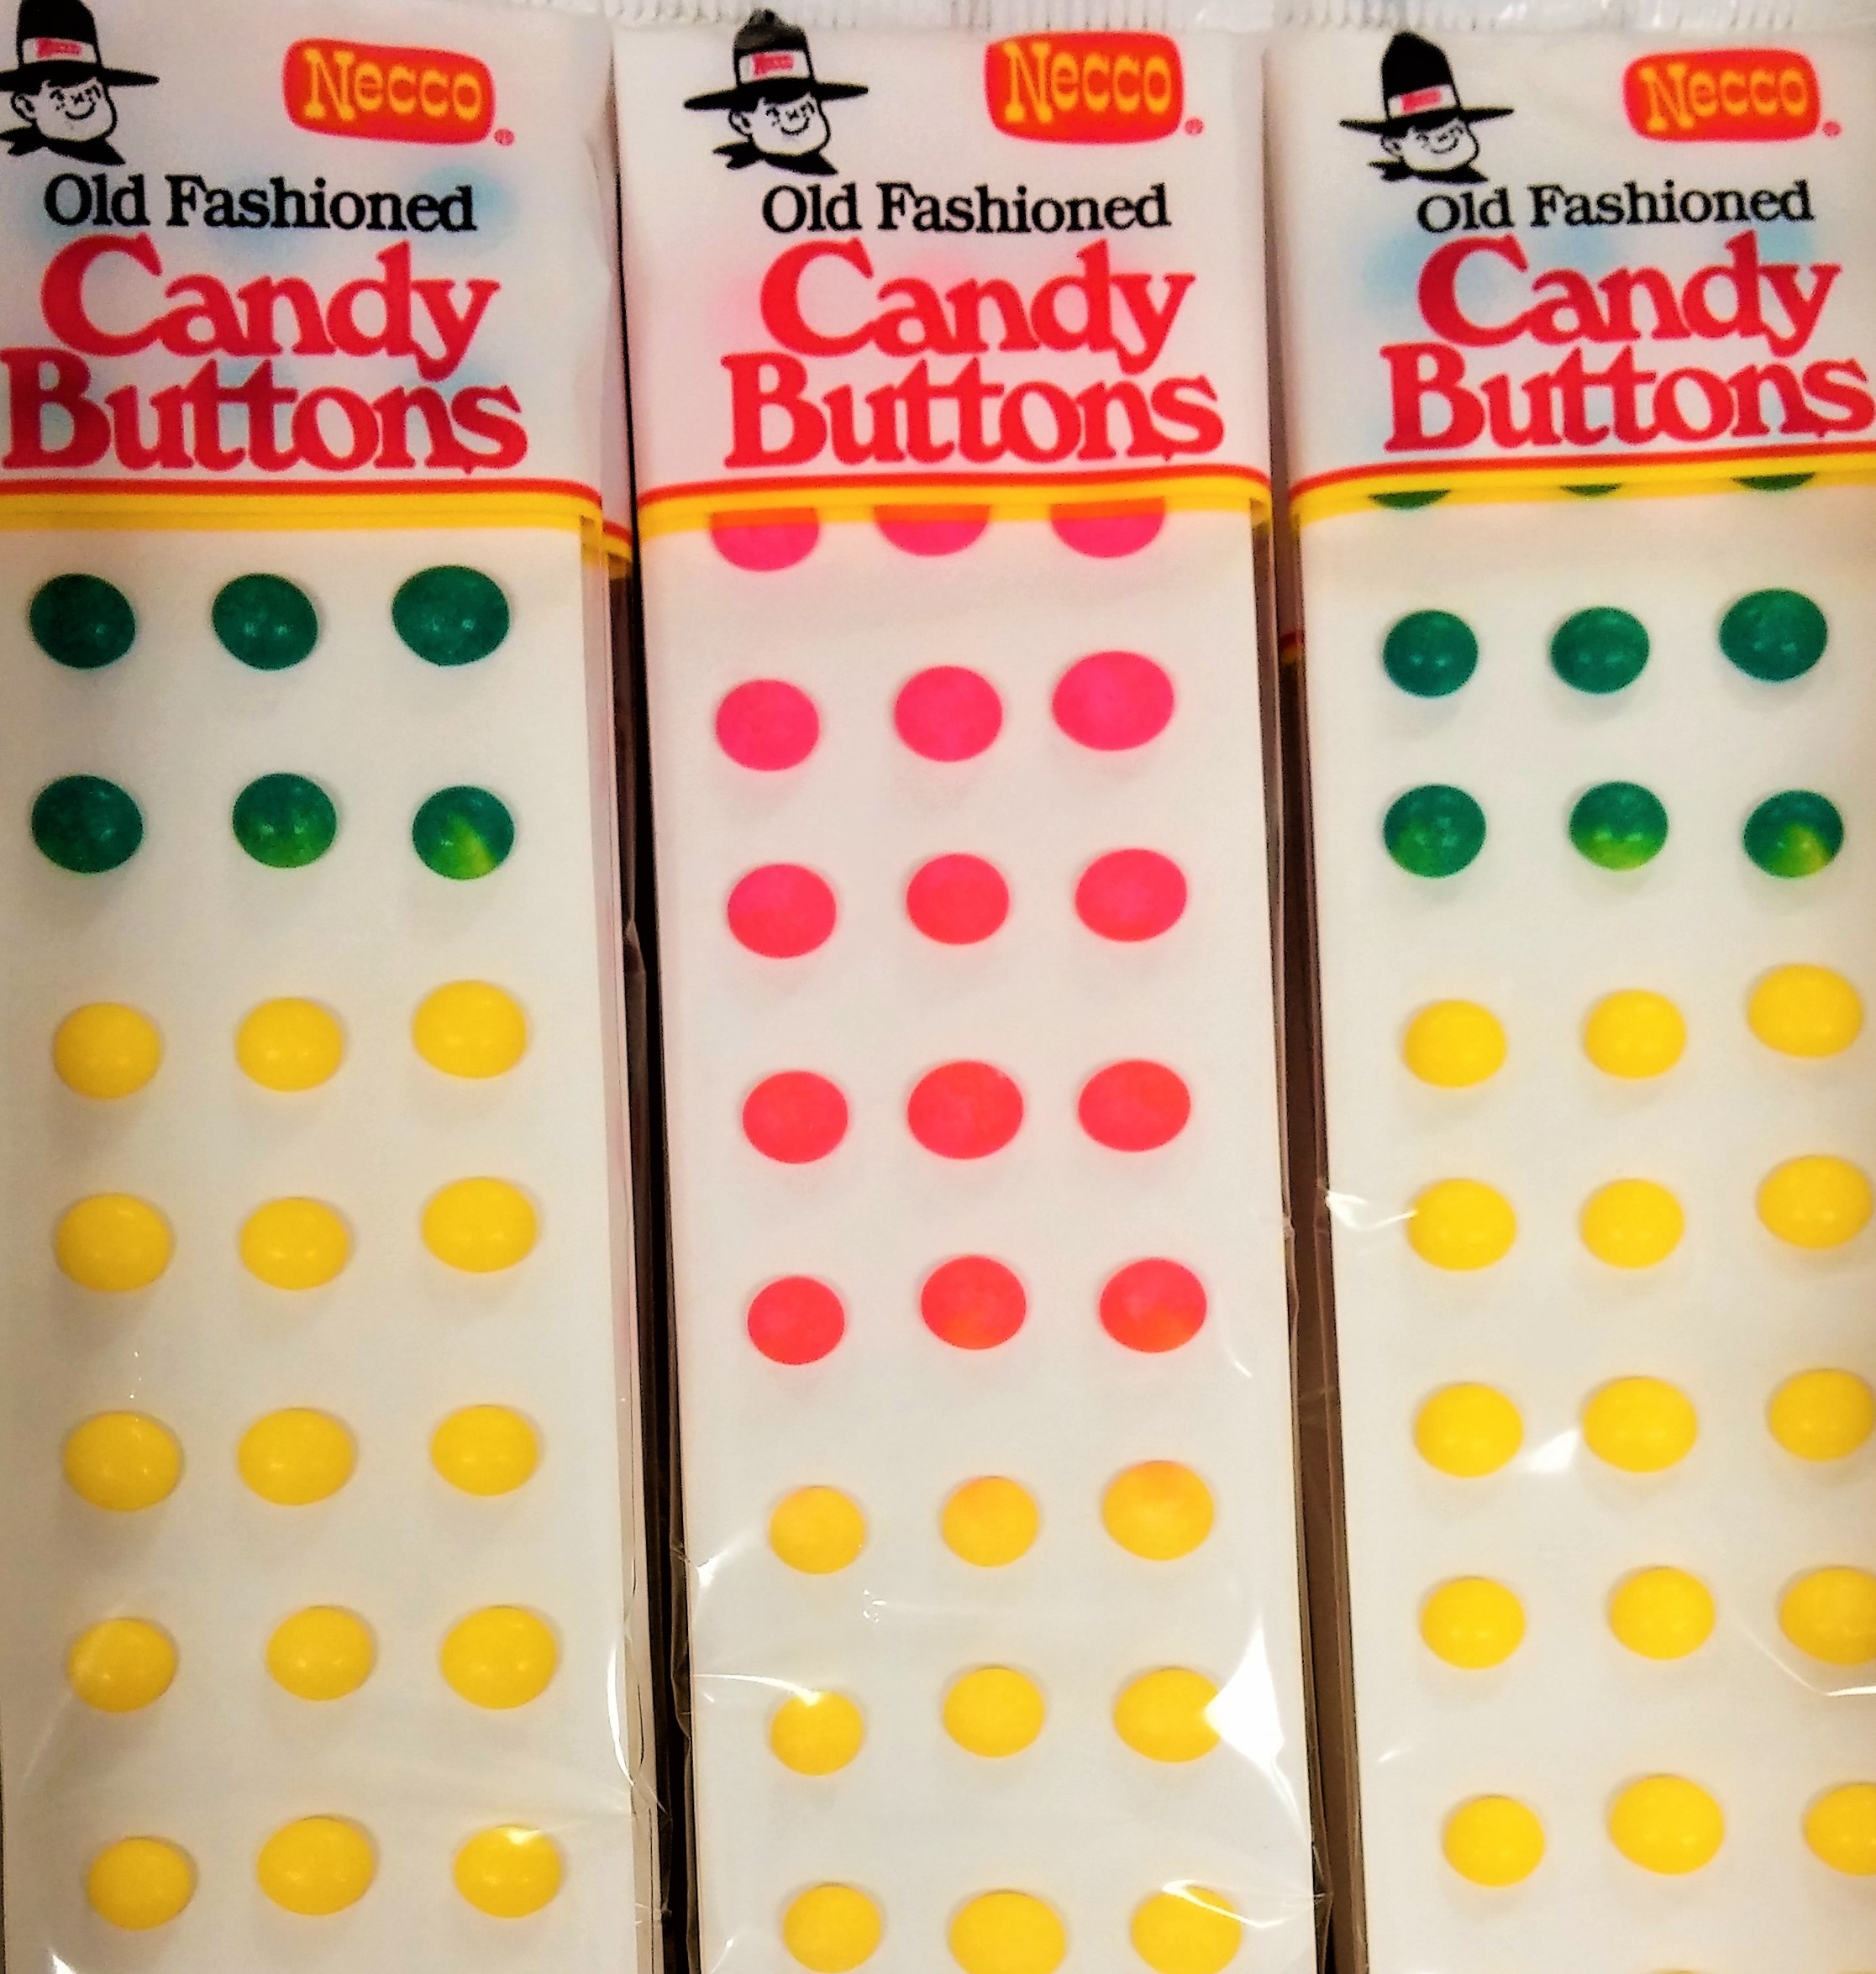  Candy Buttons